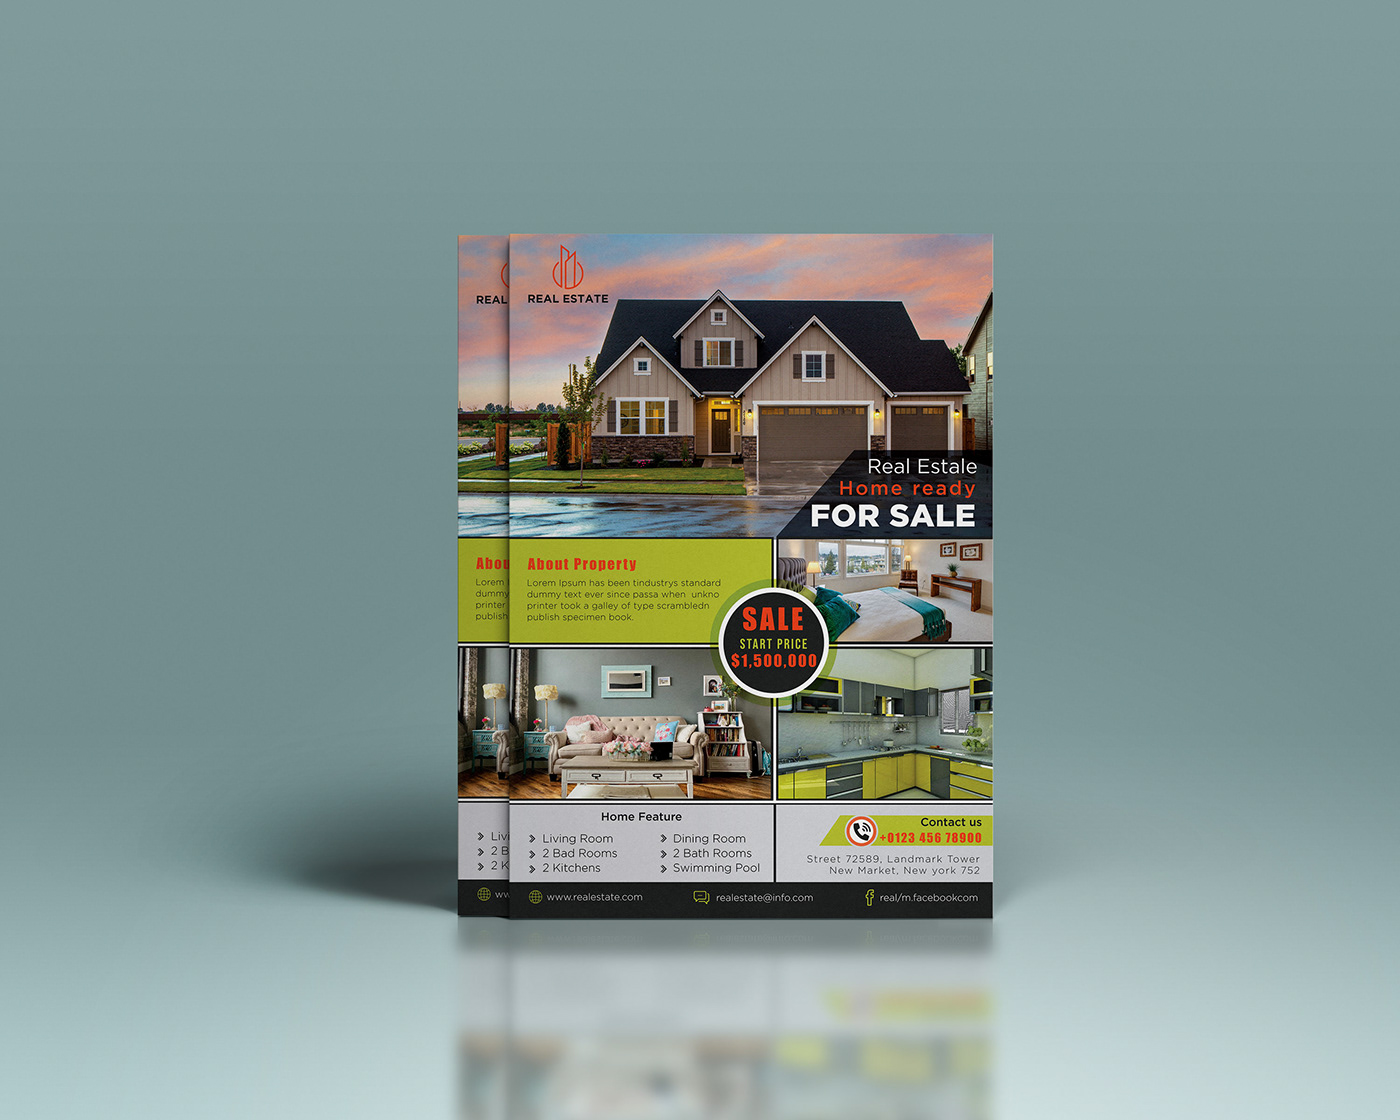 a4 flyer best real estate flyer create  real estate flyer flyer template House for Sale print ready real estate flyer real estate flyer maker real estate flyer sale real state flyer ideas